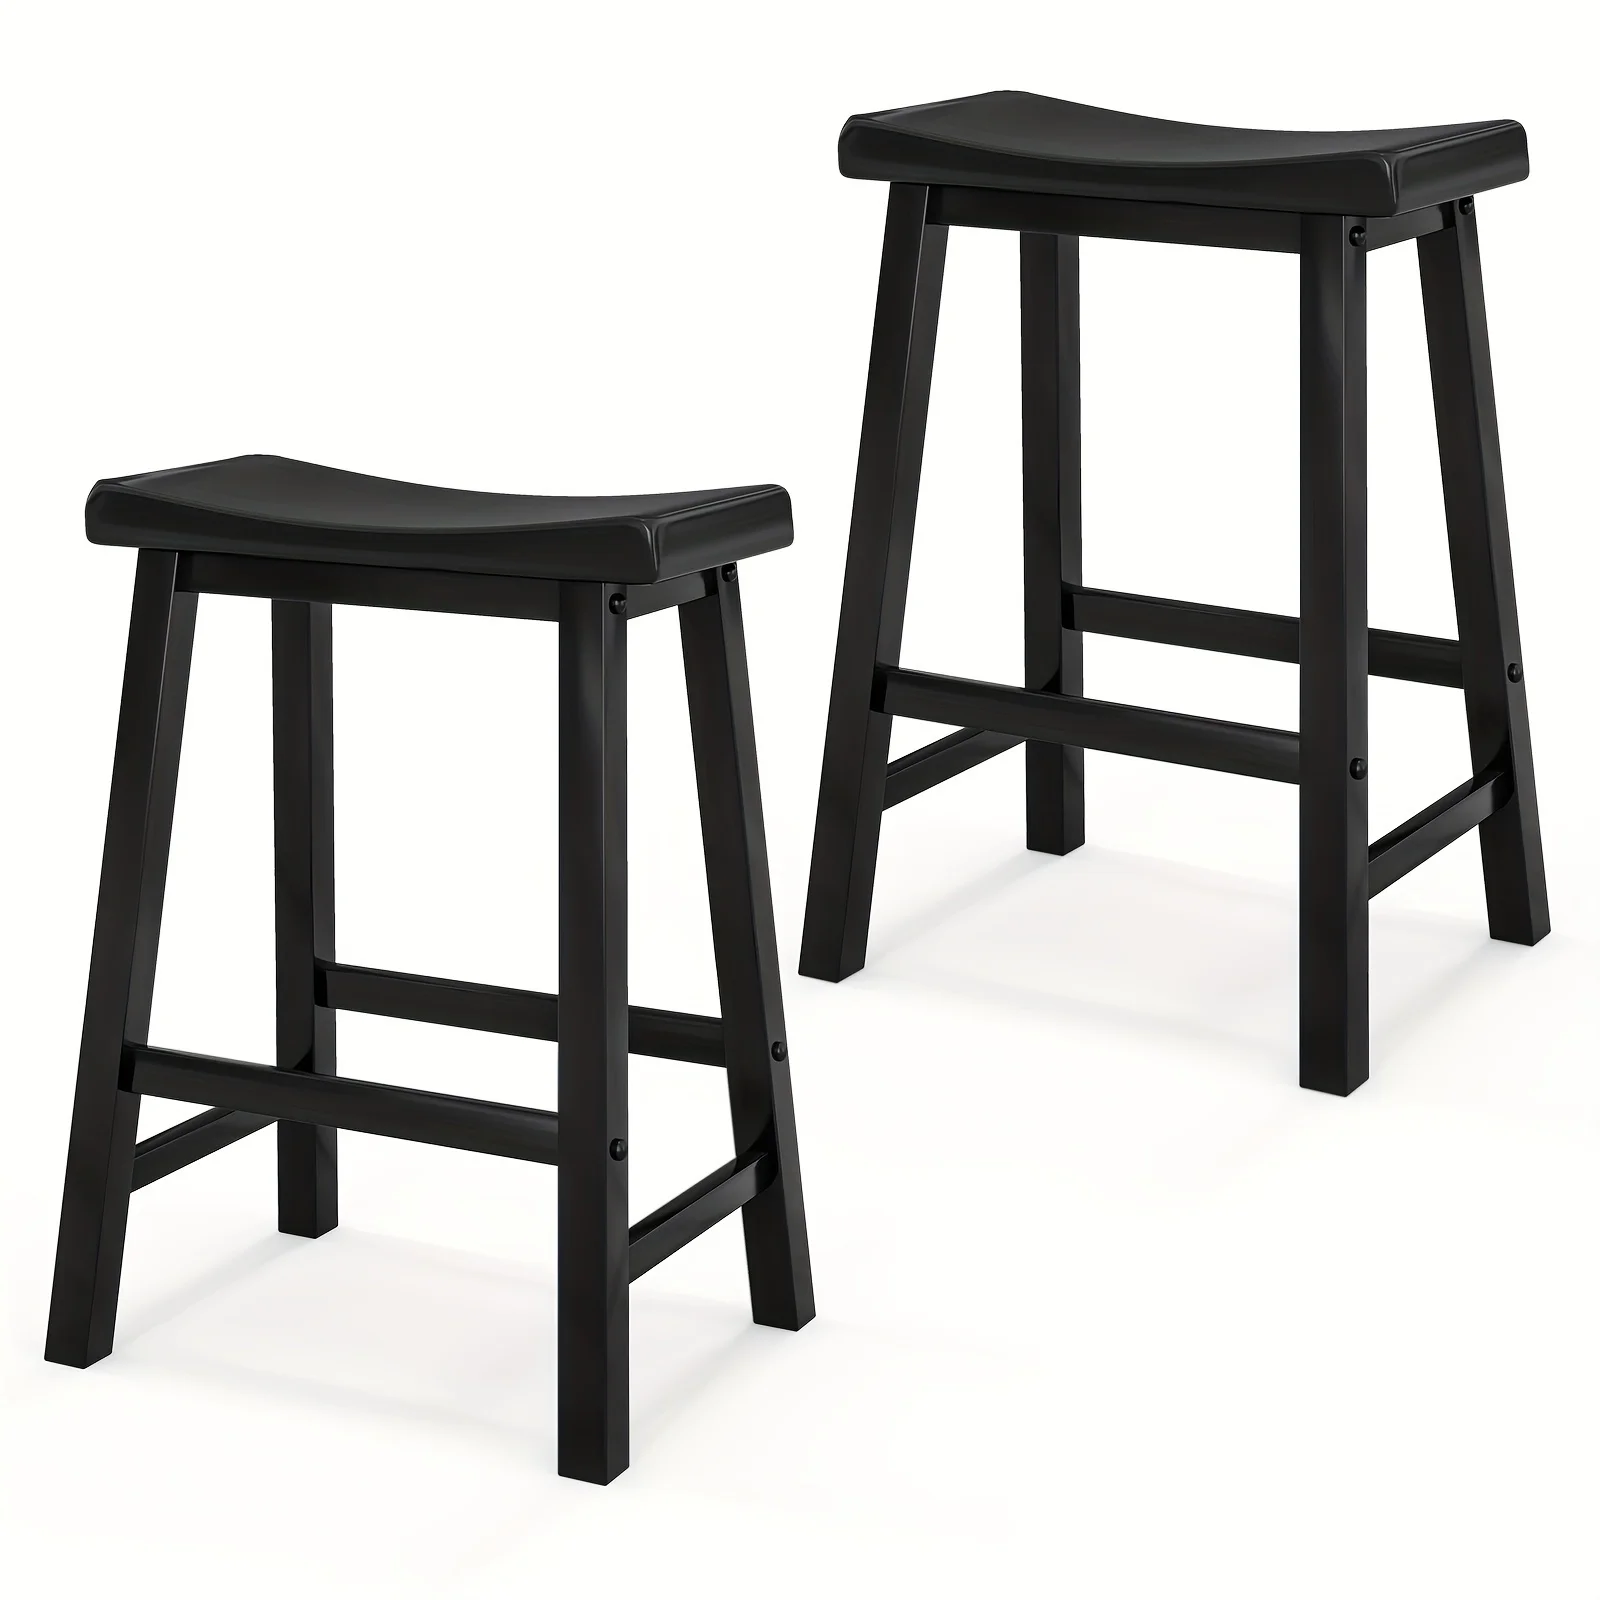 

2-Pack, Black Saddle Bar Stools, Counter Height Dining Chairs With Wooden Legs, Kitchen Island Stool, Pub Seating, Footrest Supp